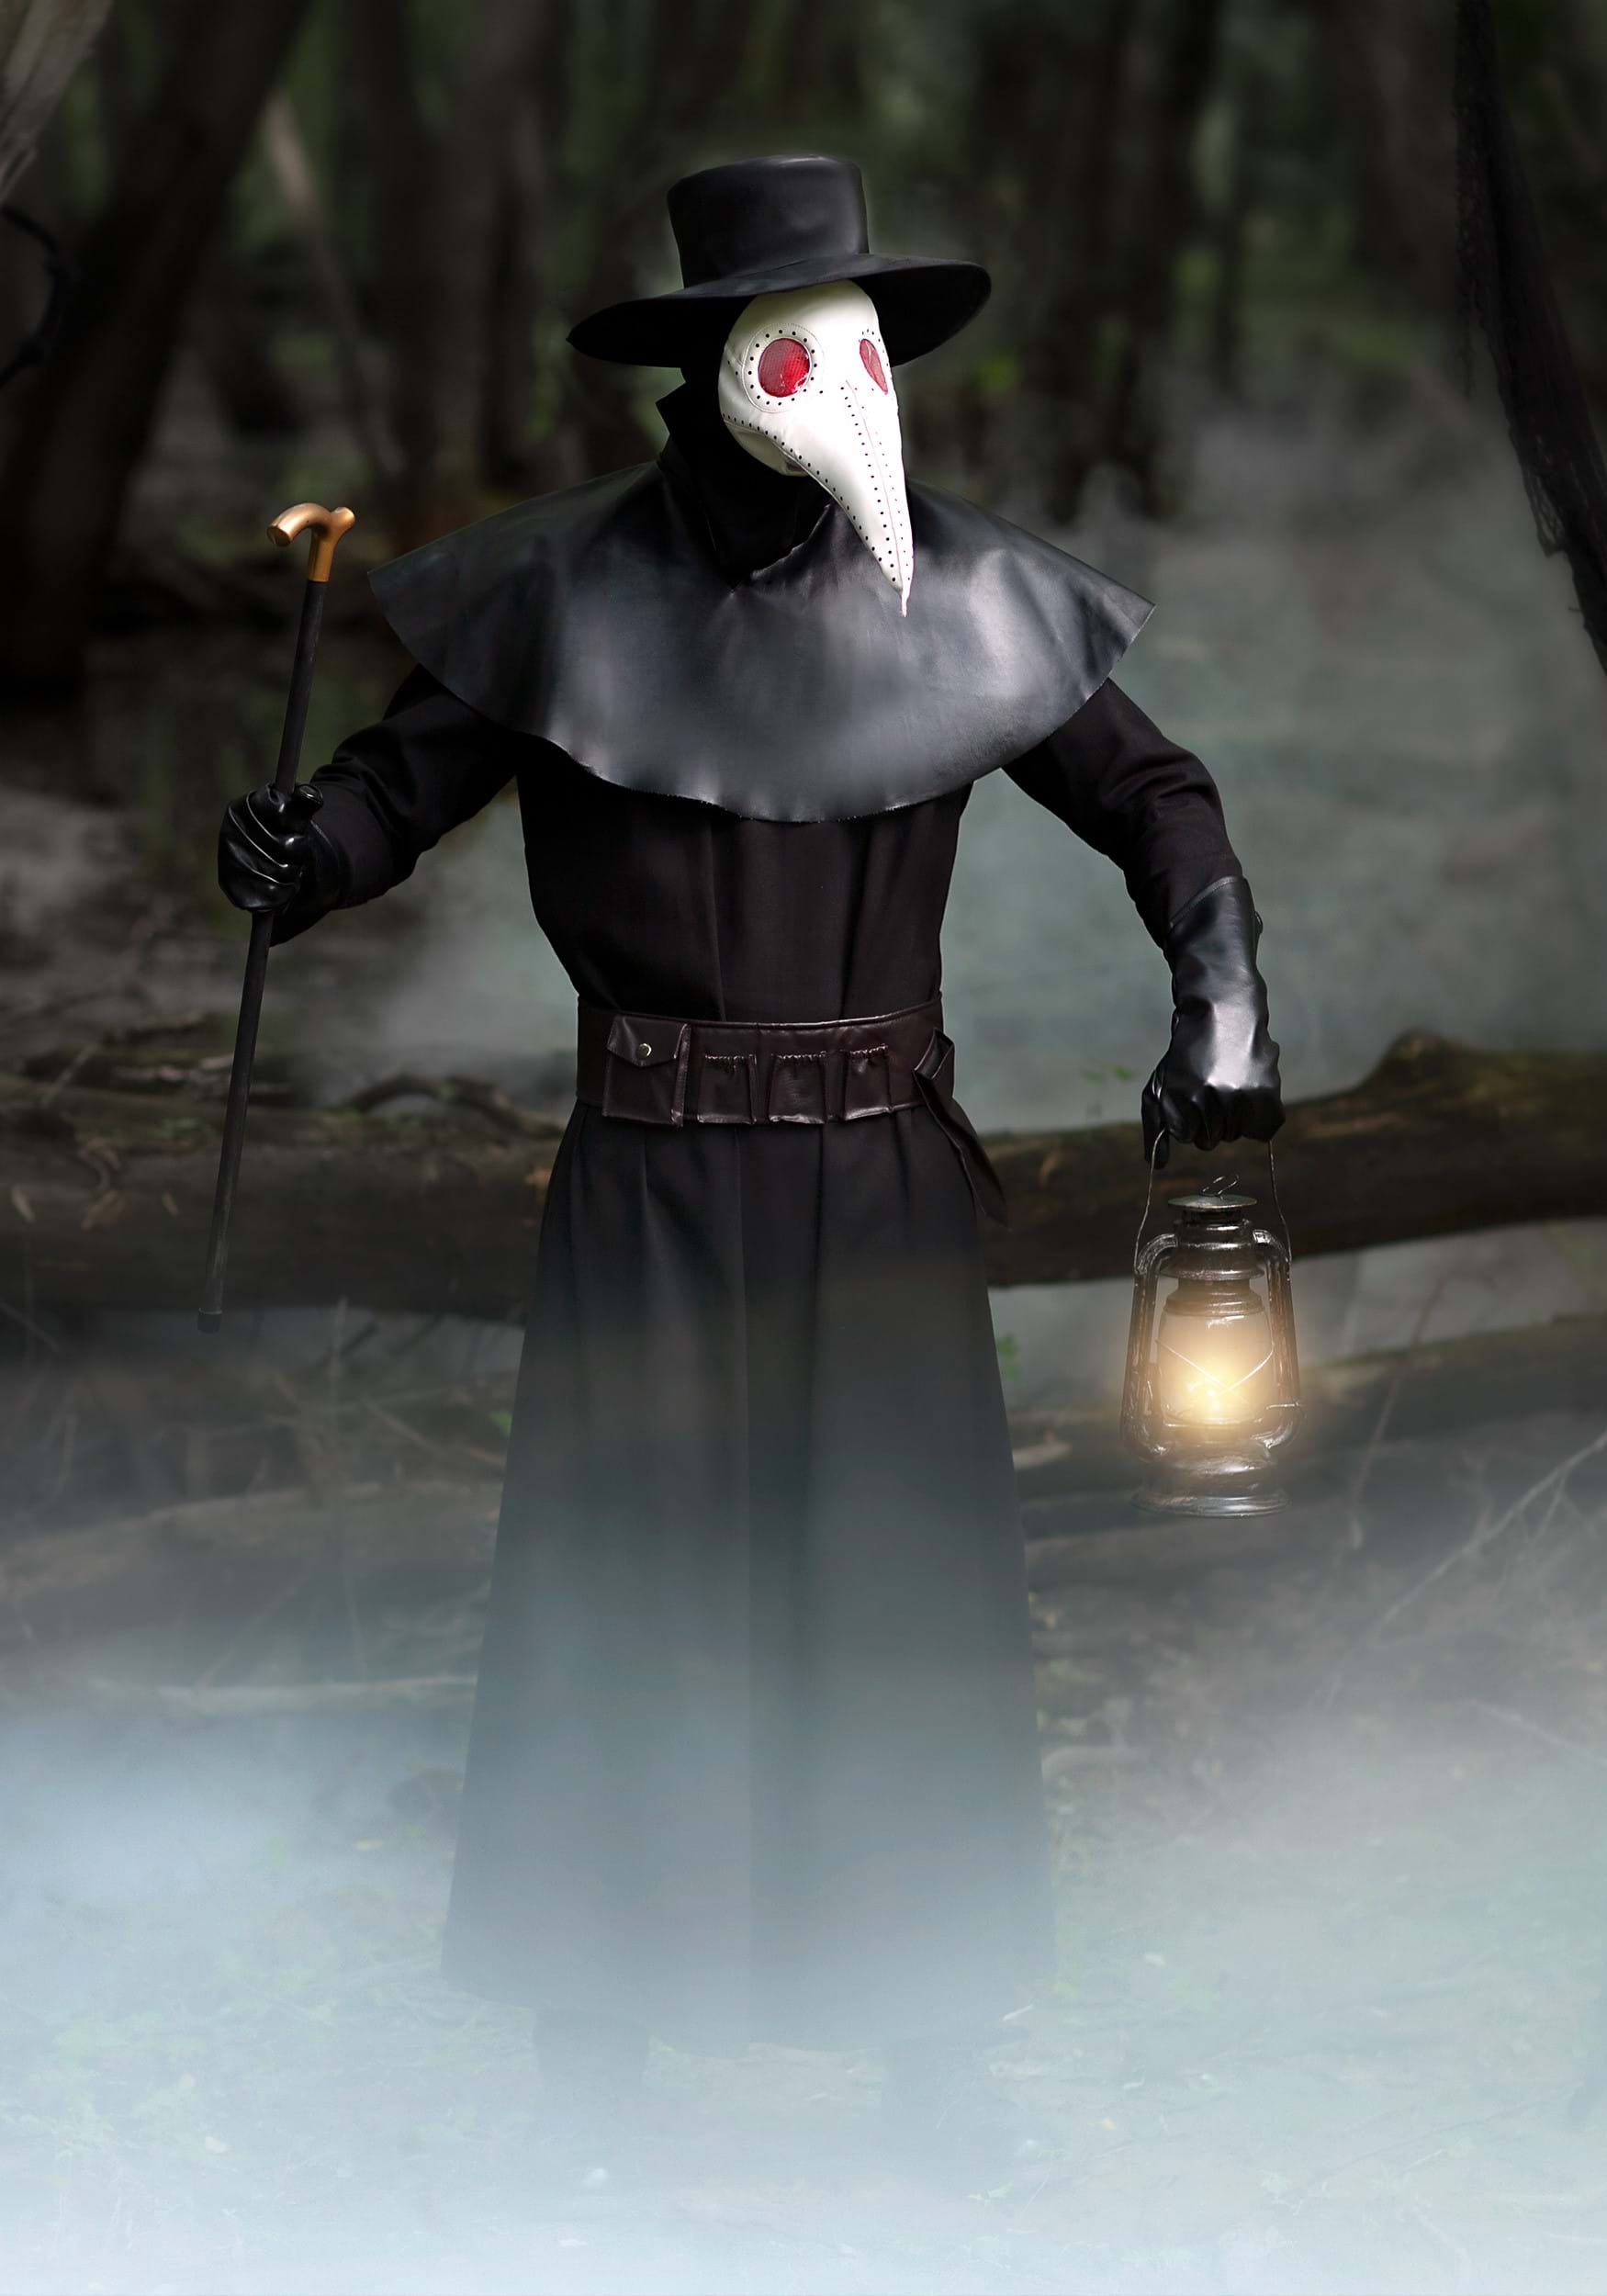 Adult Plague Doctor Plus Size Costume , Historical Costume